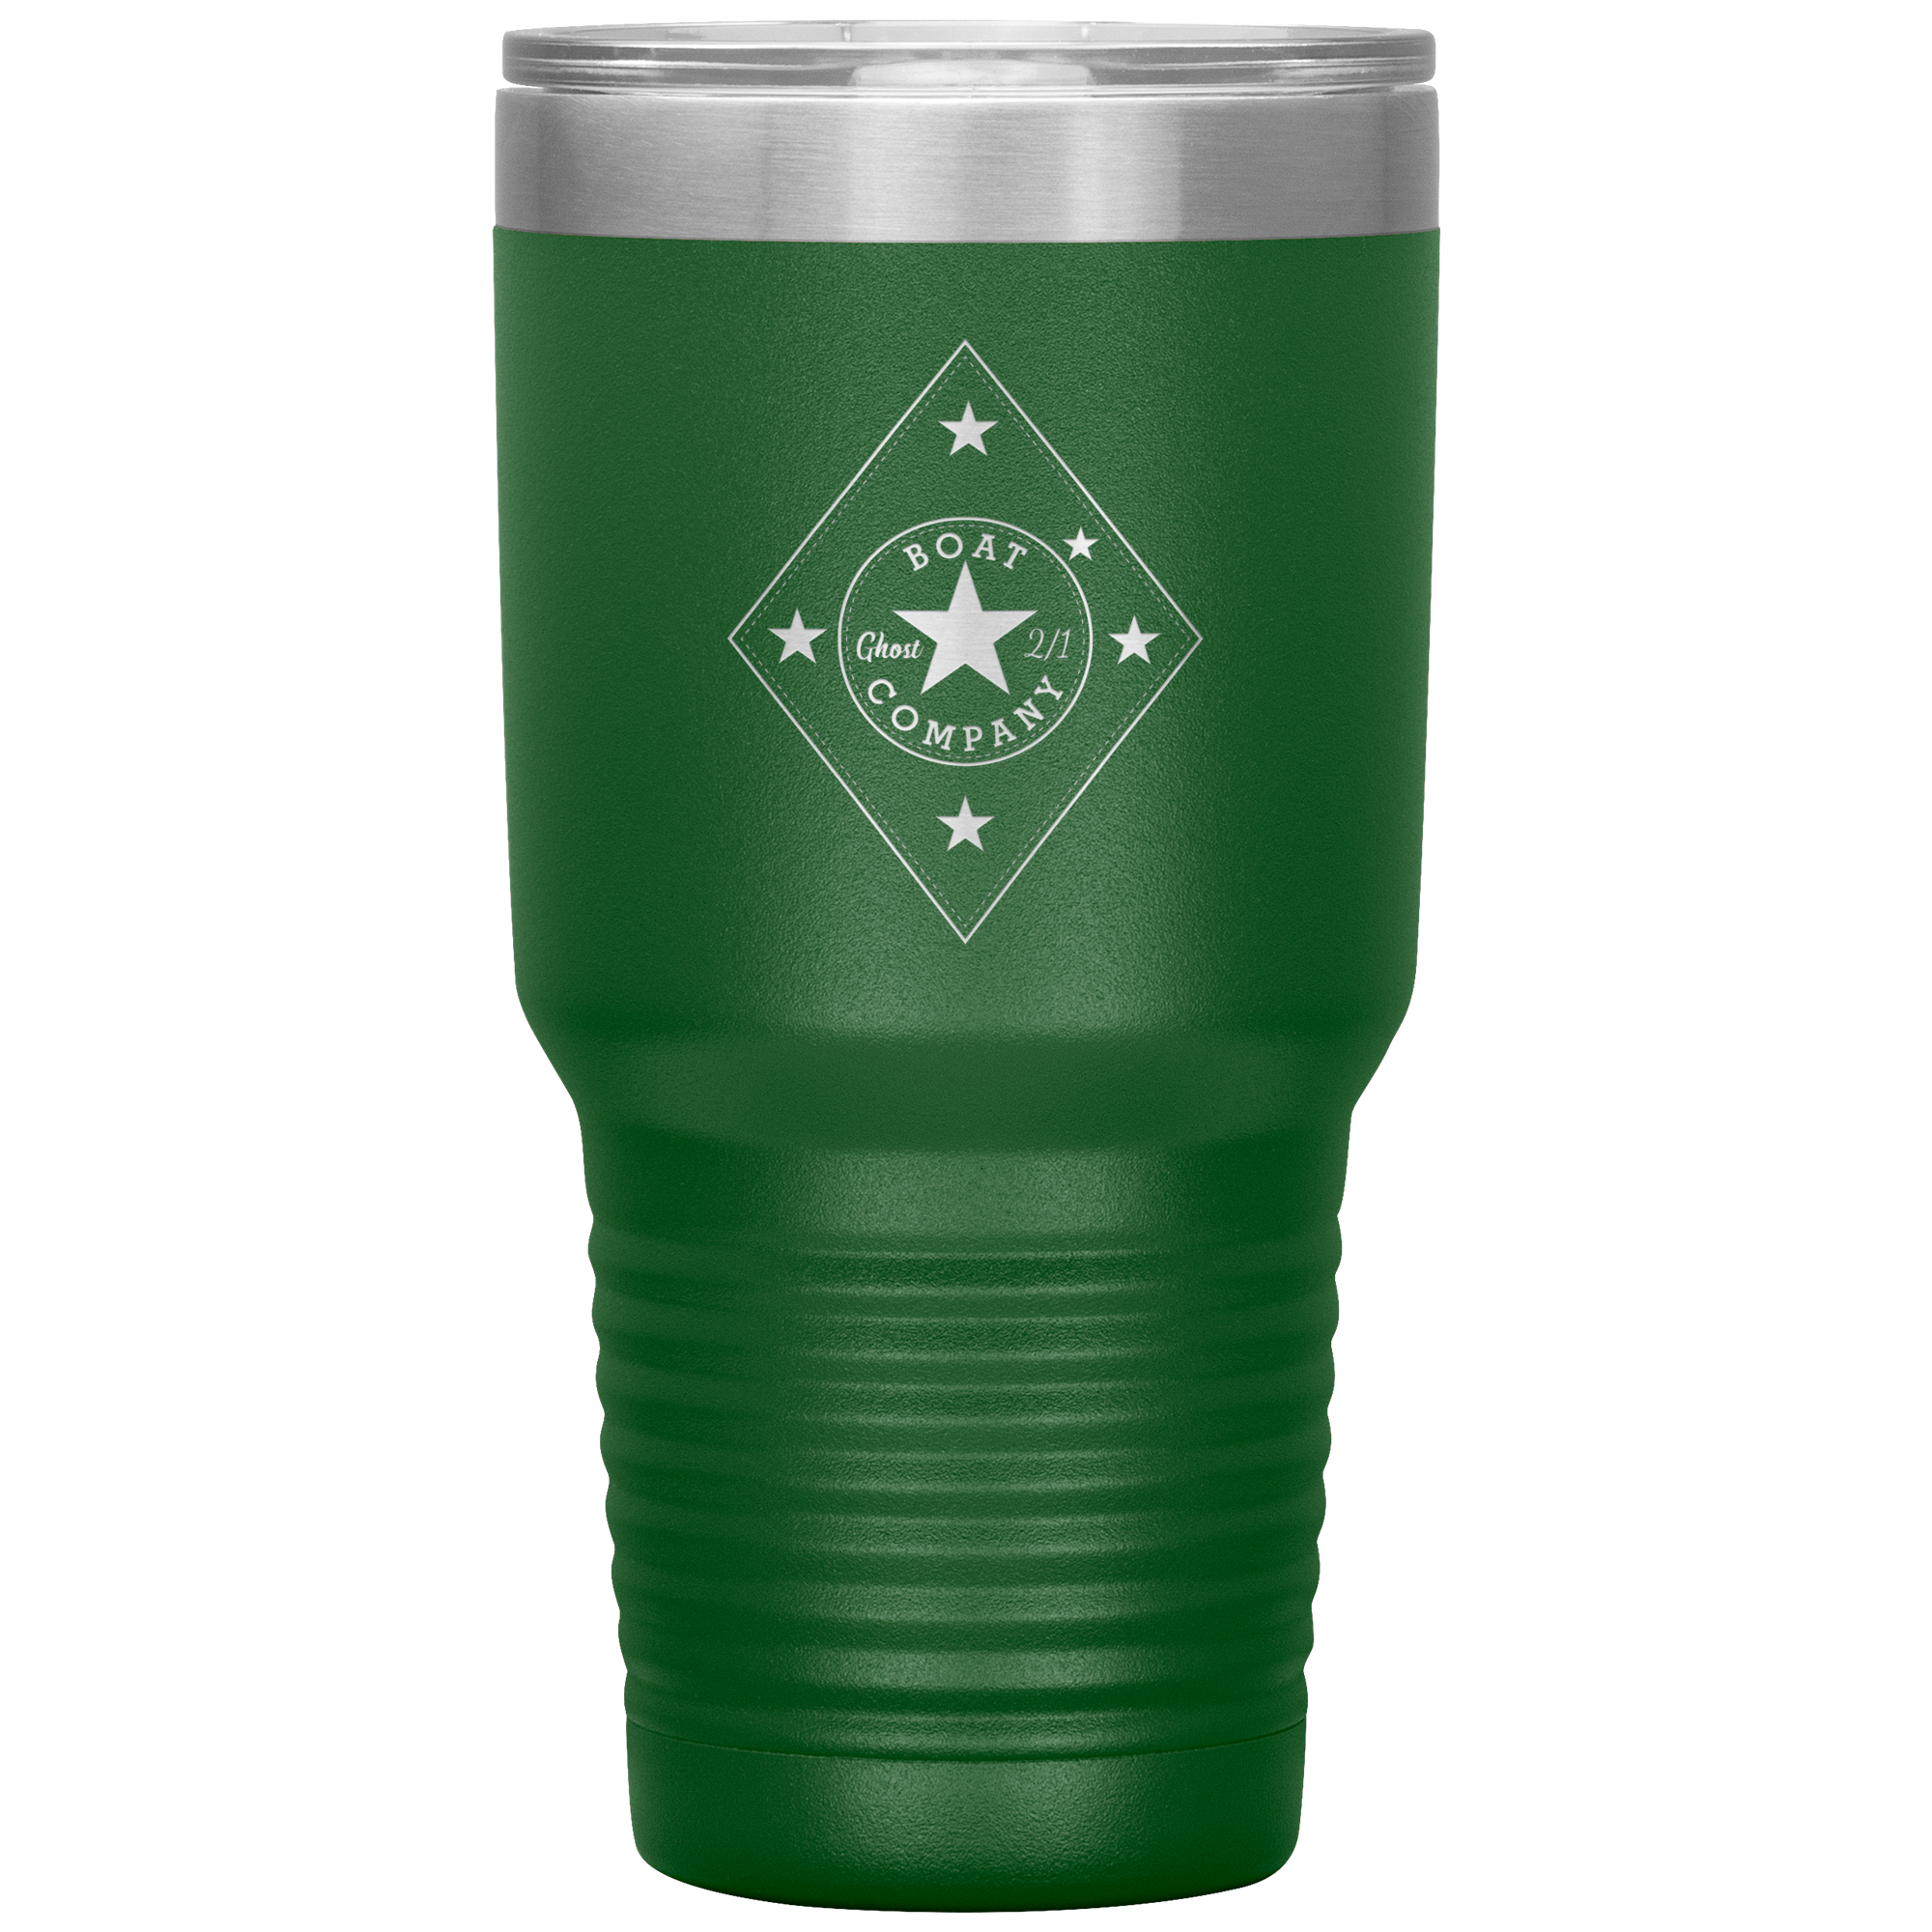 GHOST CO 2ND BN 1ST MARINES 30 oz TUMBLER